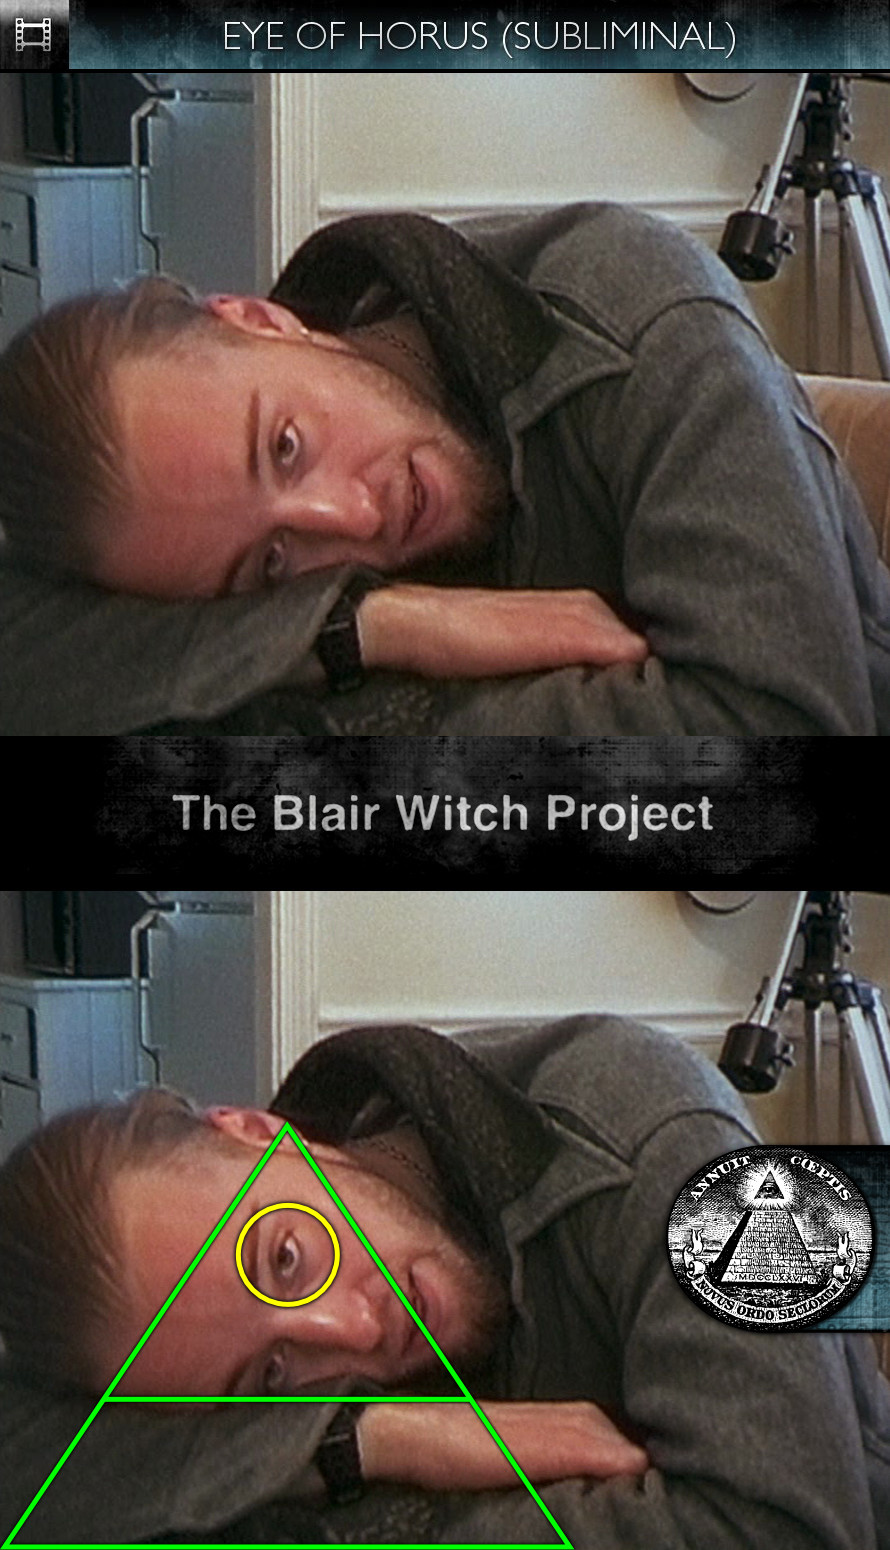 The Blair Witch Project (1999) - Eye of Horus - Subliminal